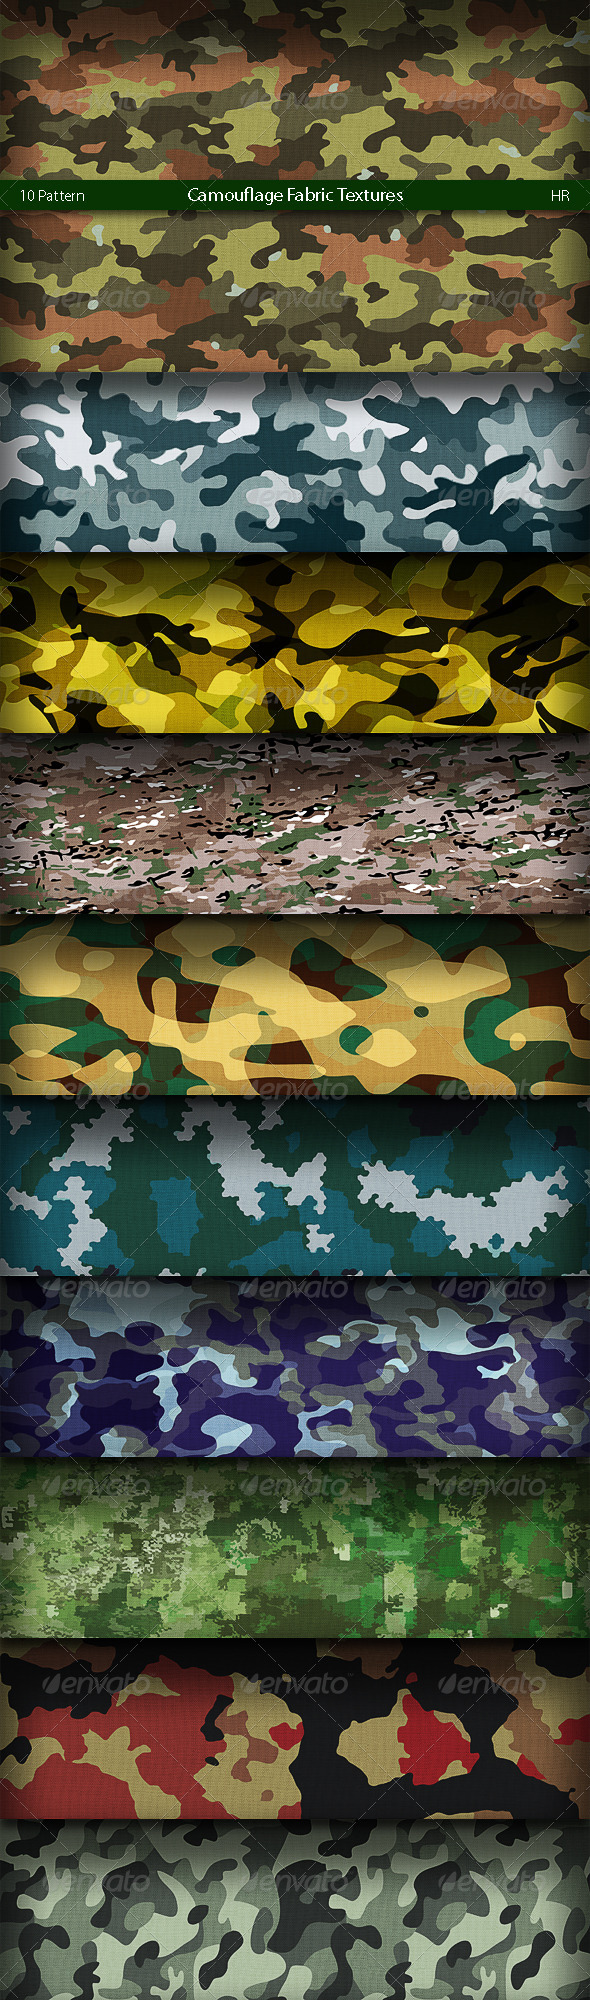 Camouflage Texture Backgrounds